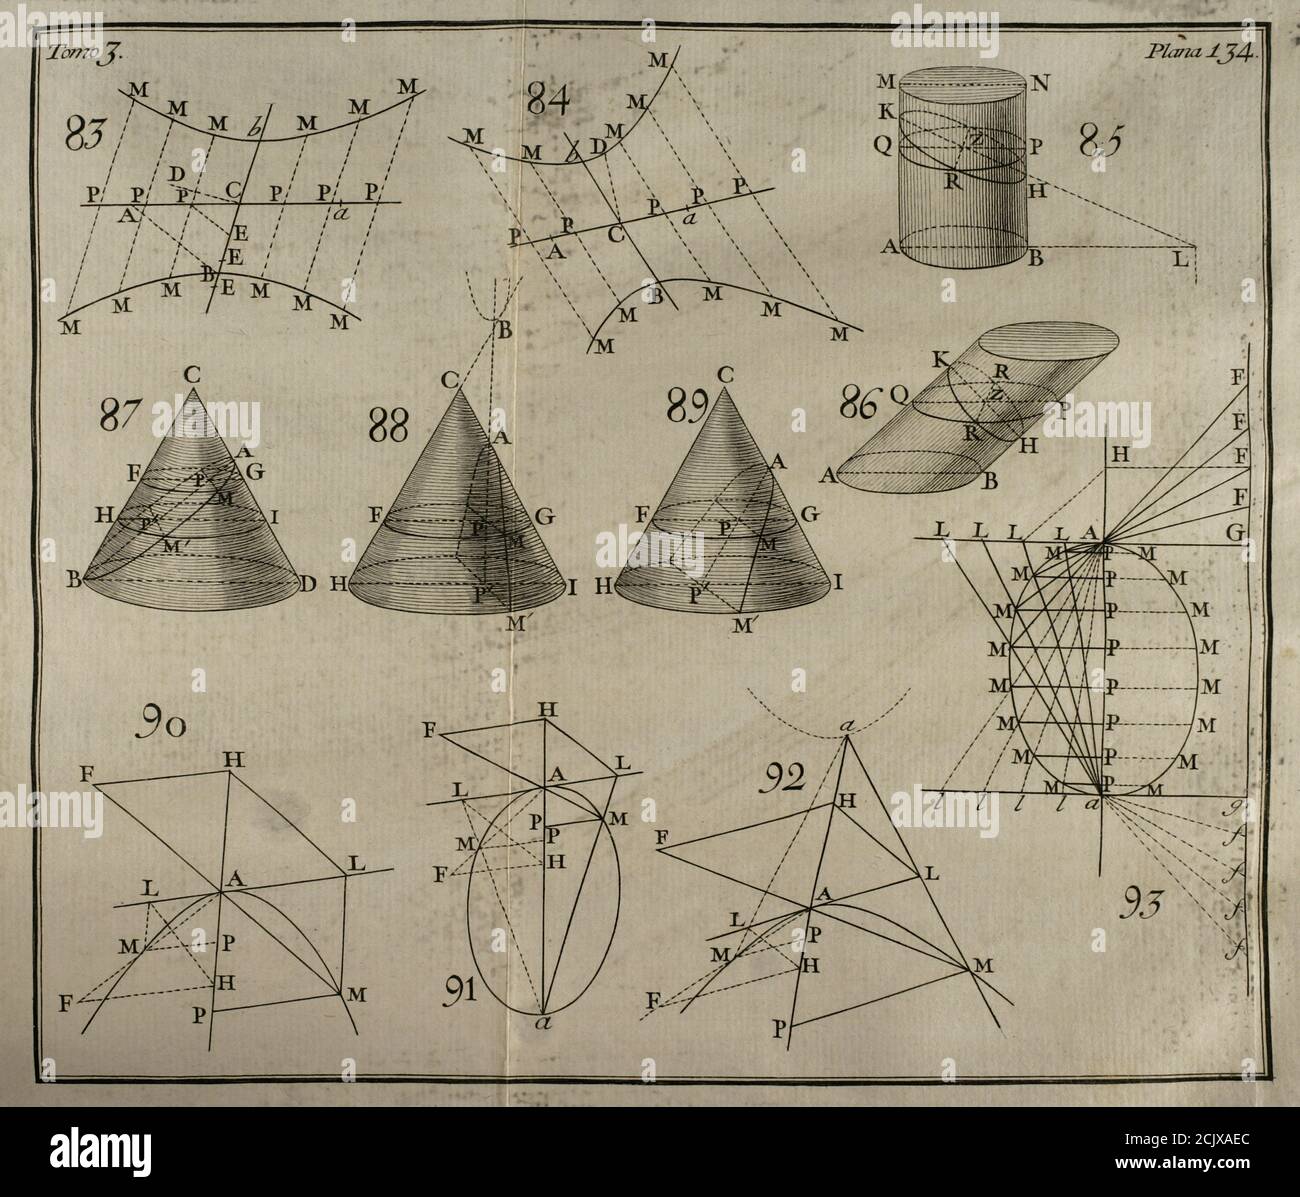 "Elementos de Matematica" (Elements of Mathematics), by the Spanish architect and mathematician Benito Bails (1730-1797). Conical sections. Engraving. Volume III, which treats elements of conic sections, elements of infinitesimal calculus and spherical trigonometry. Published in Madrid, 1779. Stock Photo